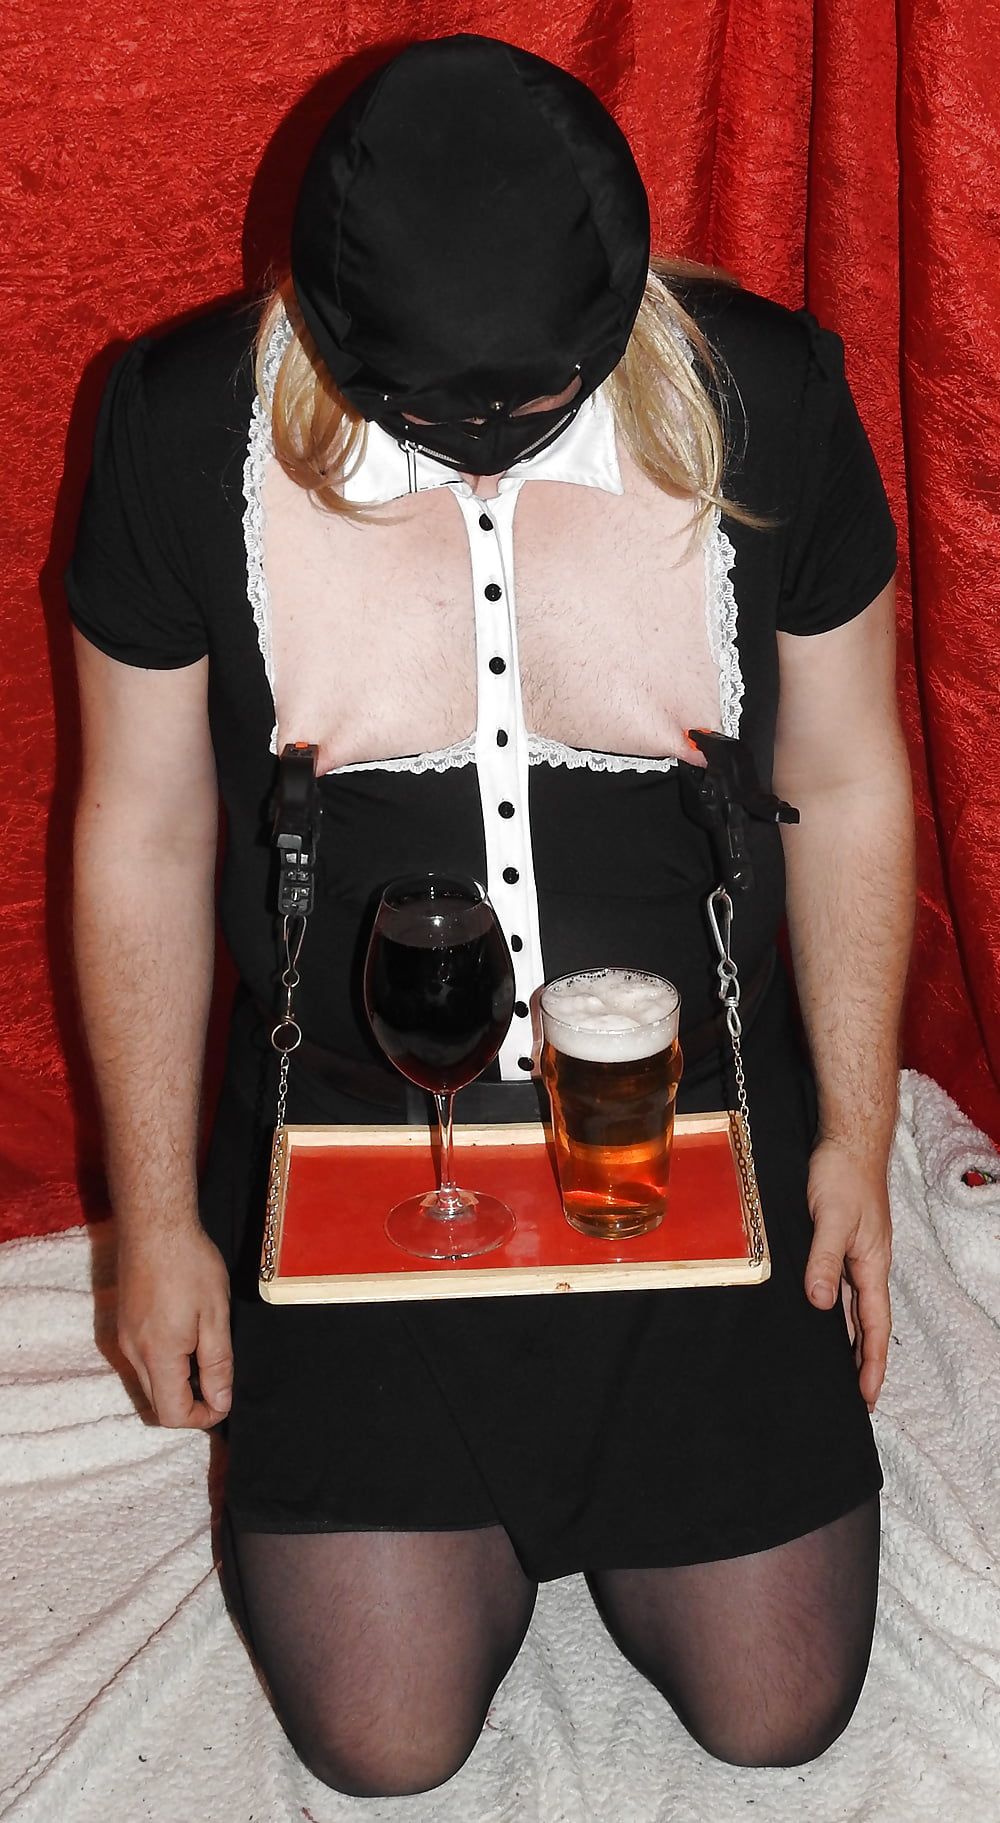 Sissy Served drinks by Glass #10